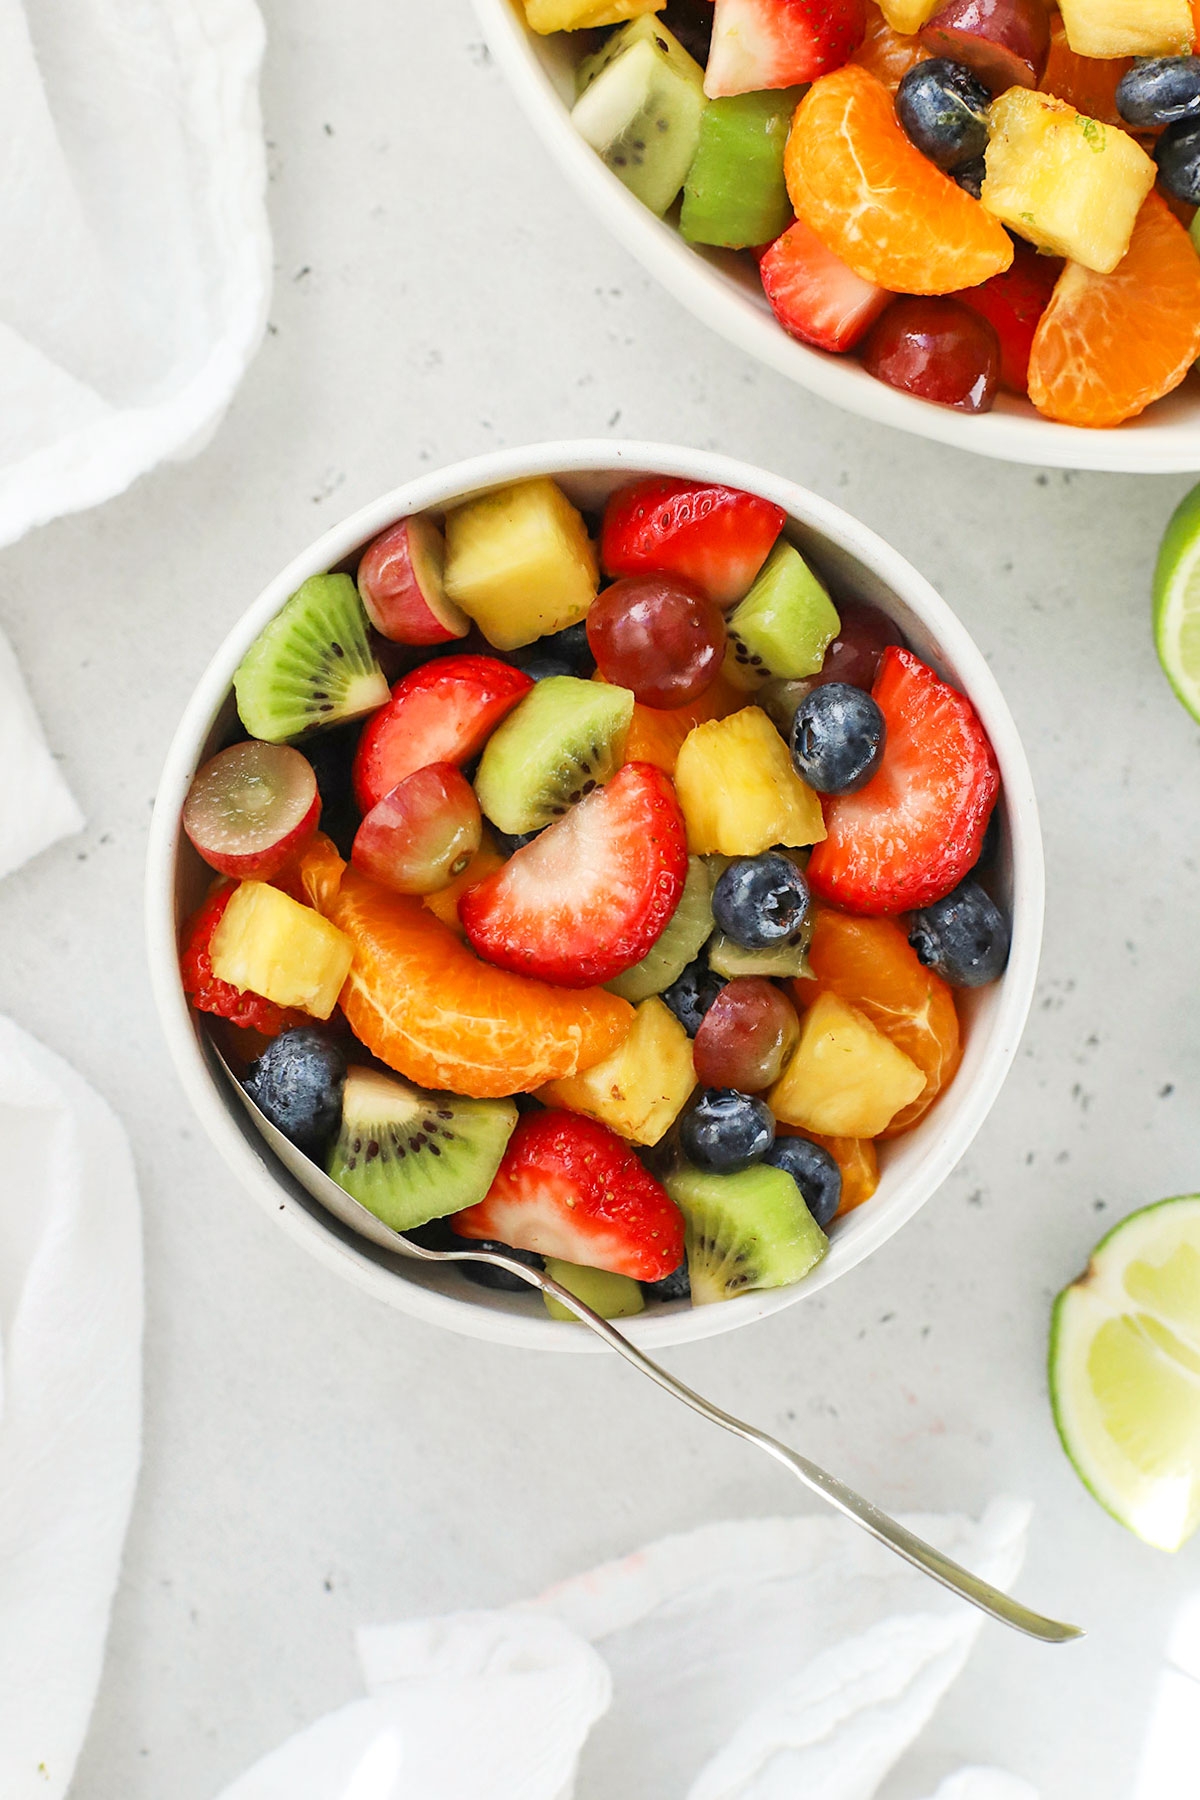 A small white bowl of colorful fruit salad